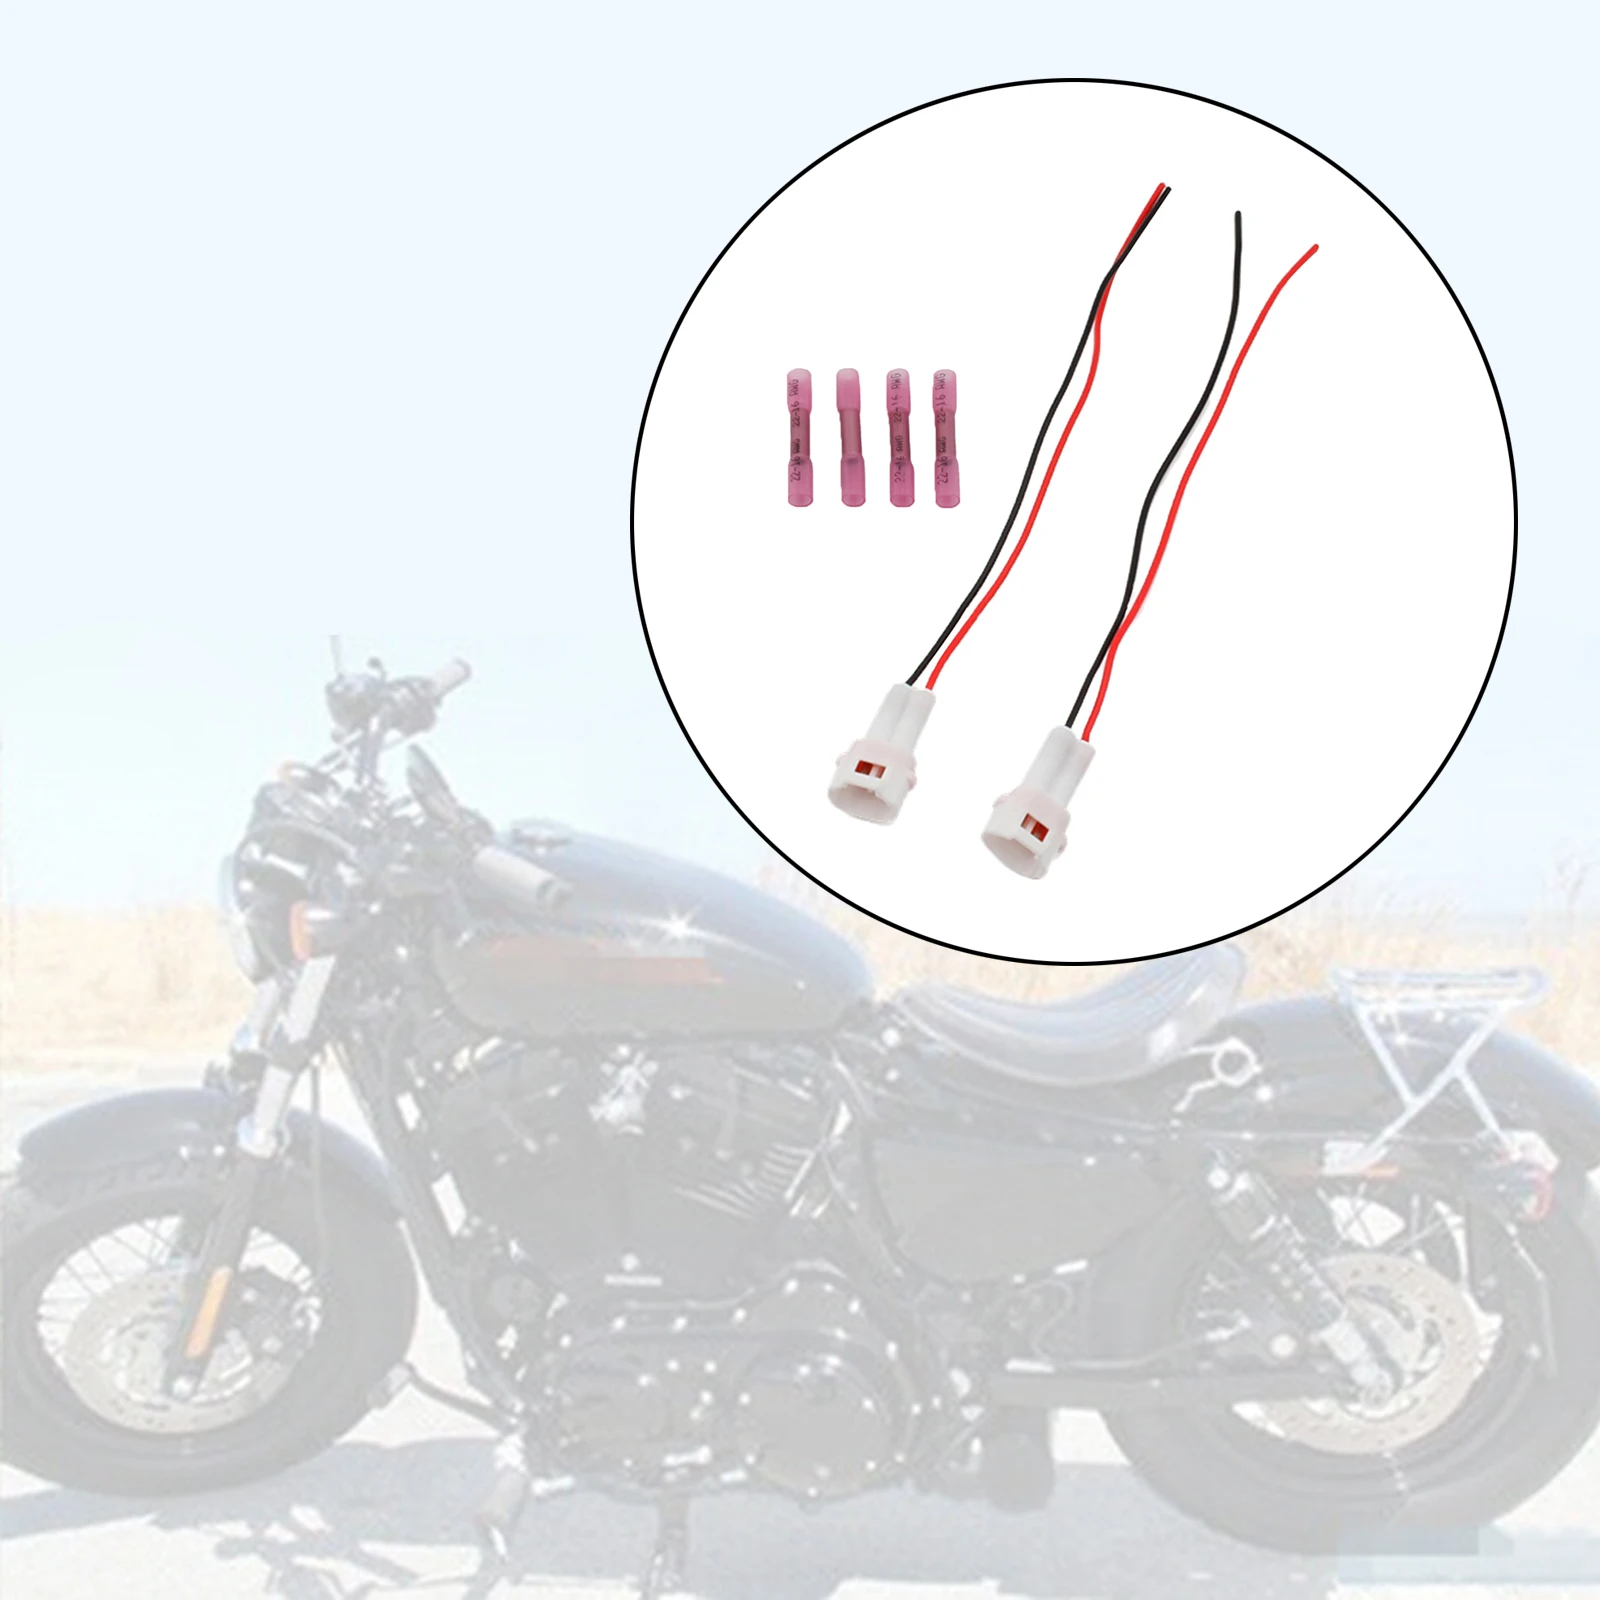 2Pcs Accessory Power Lead Kit Connector Fits for Yamaha RMAX2 RMAX4 850 X2 X4 708 2016-2021 Perfect Fitment